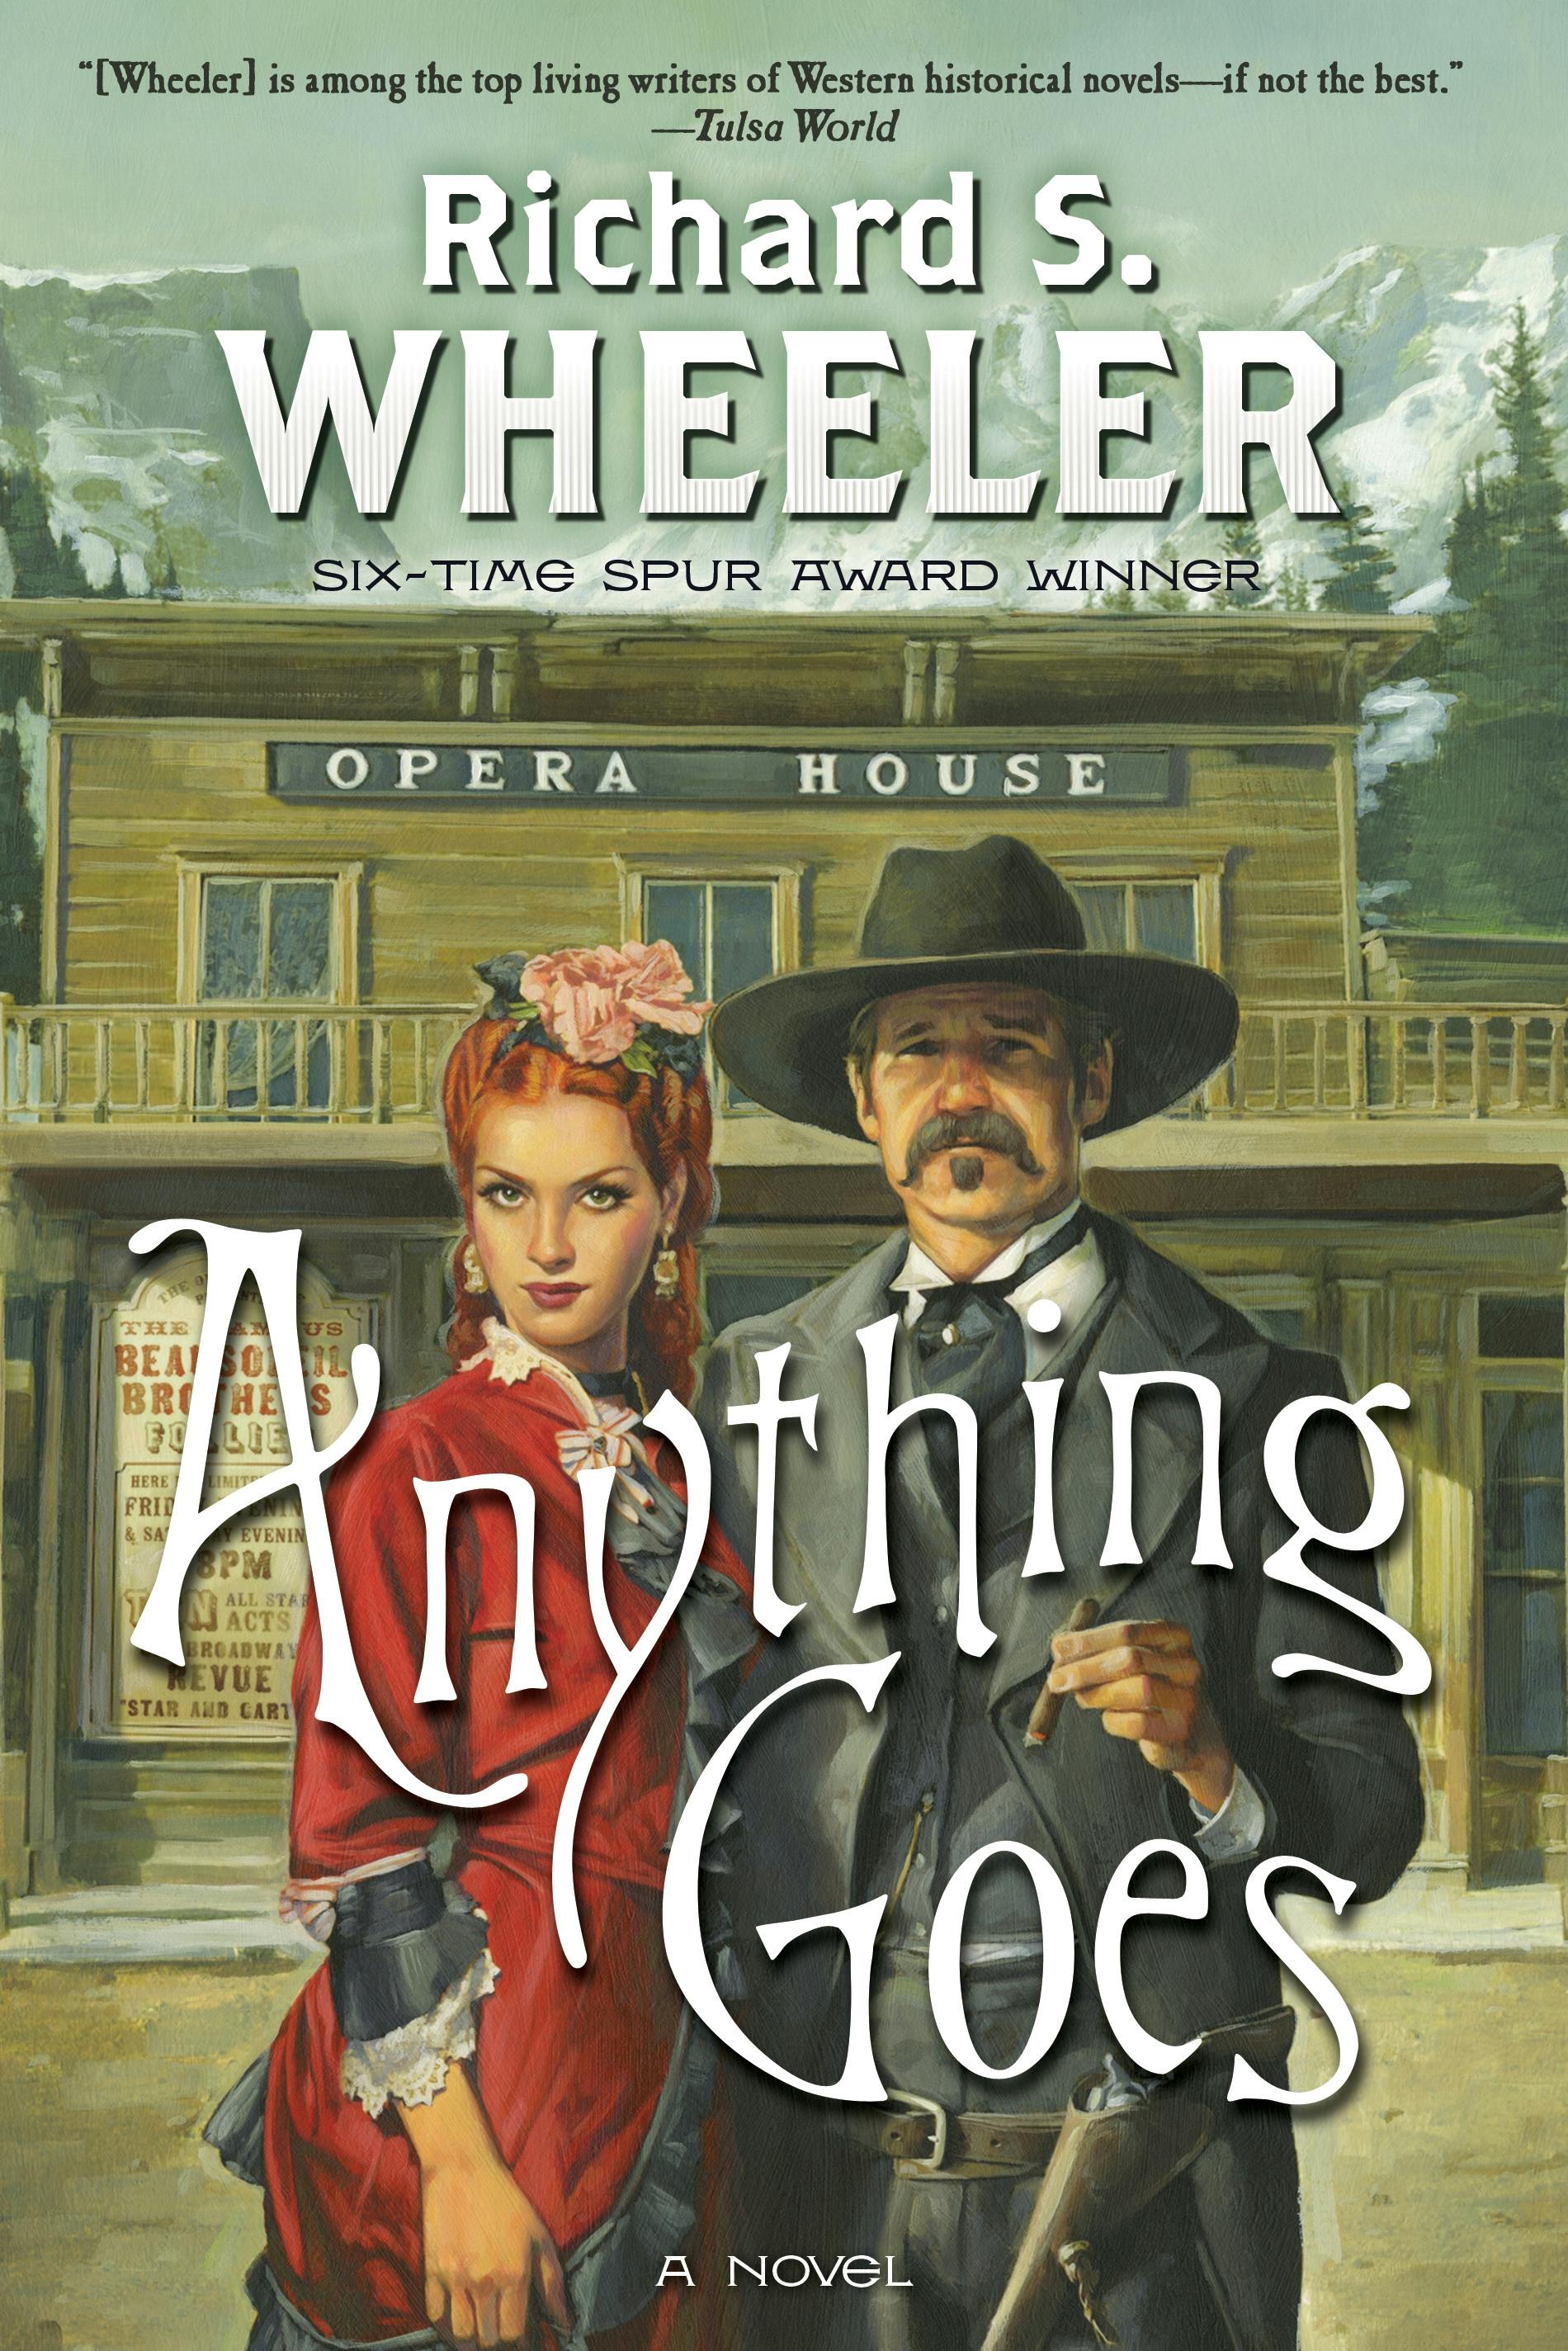 Cover for the book titled as: Anything Goes